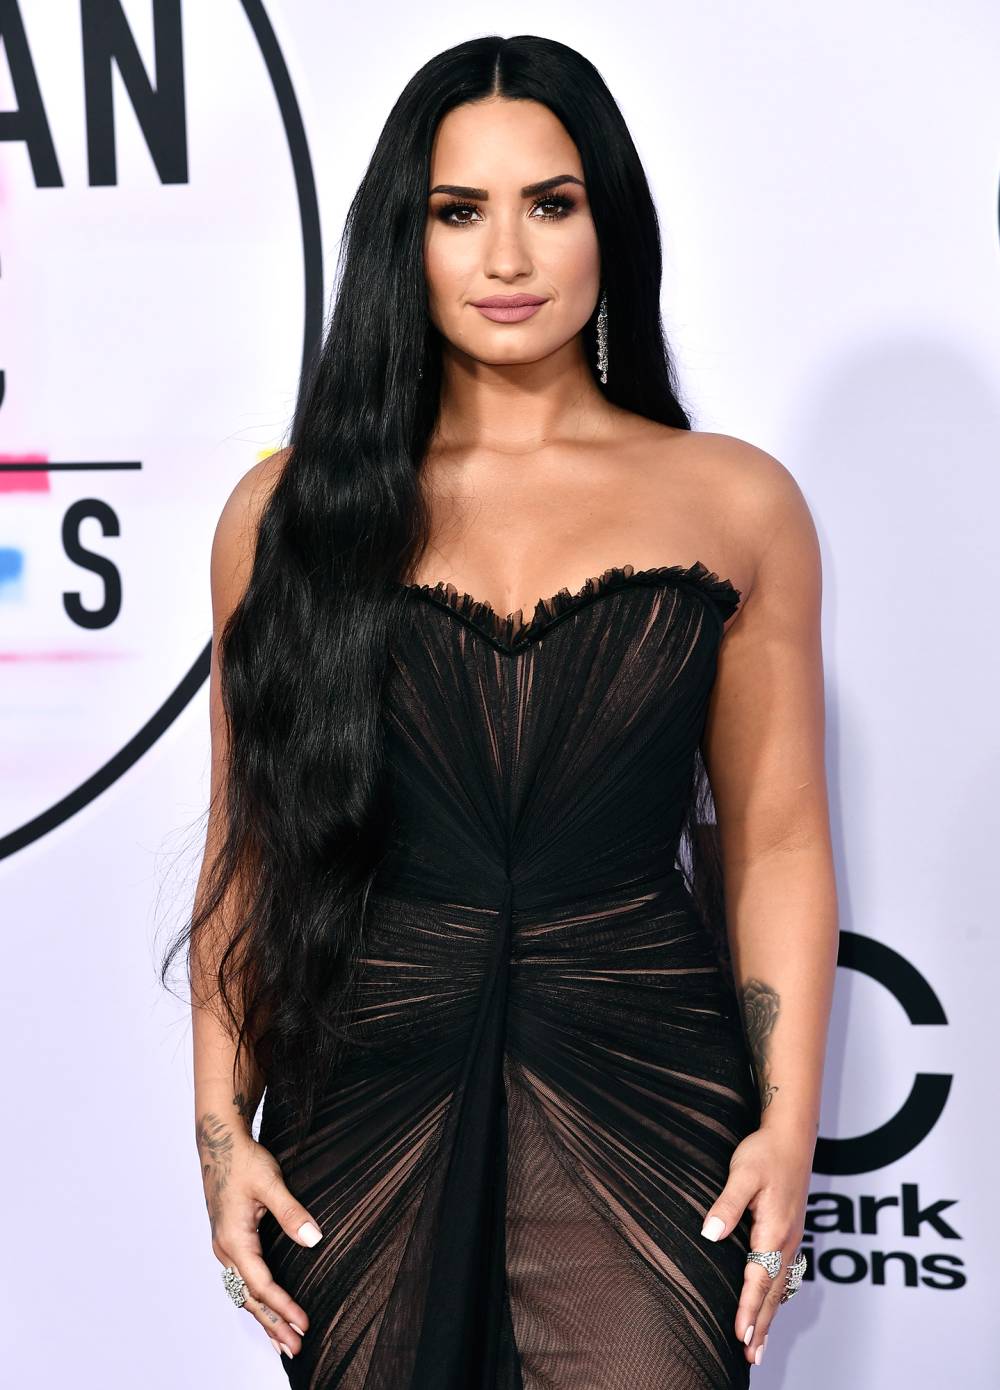 Demi Lovato 'Didn't Know' If She'd 'Ever Step Foot on a Stage Again' After 2018 Overdose